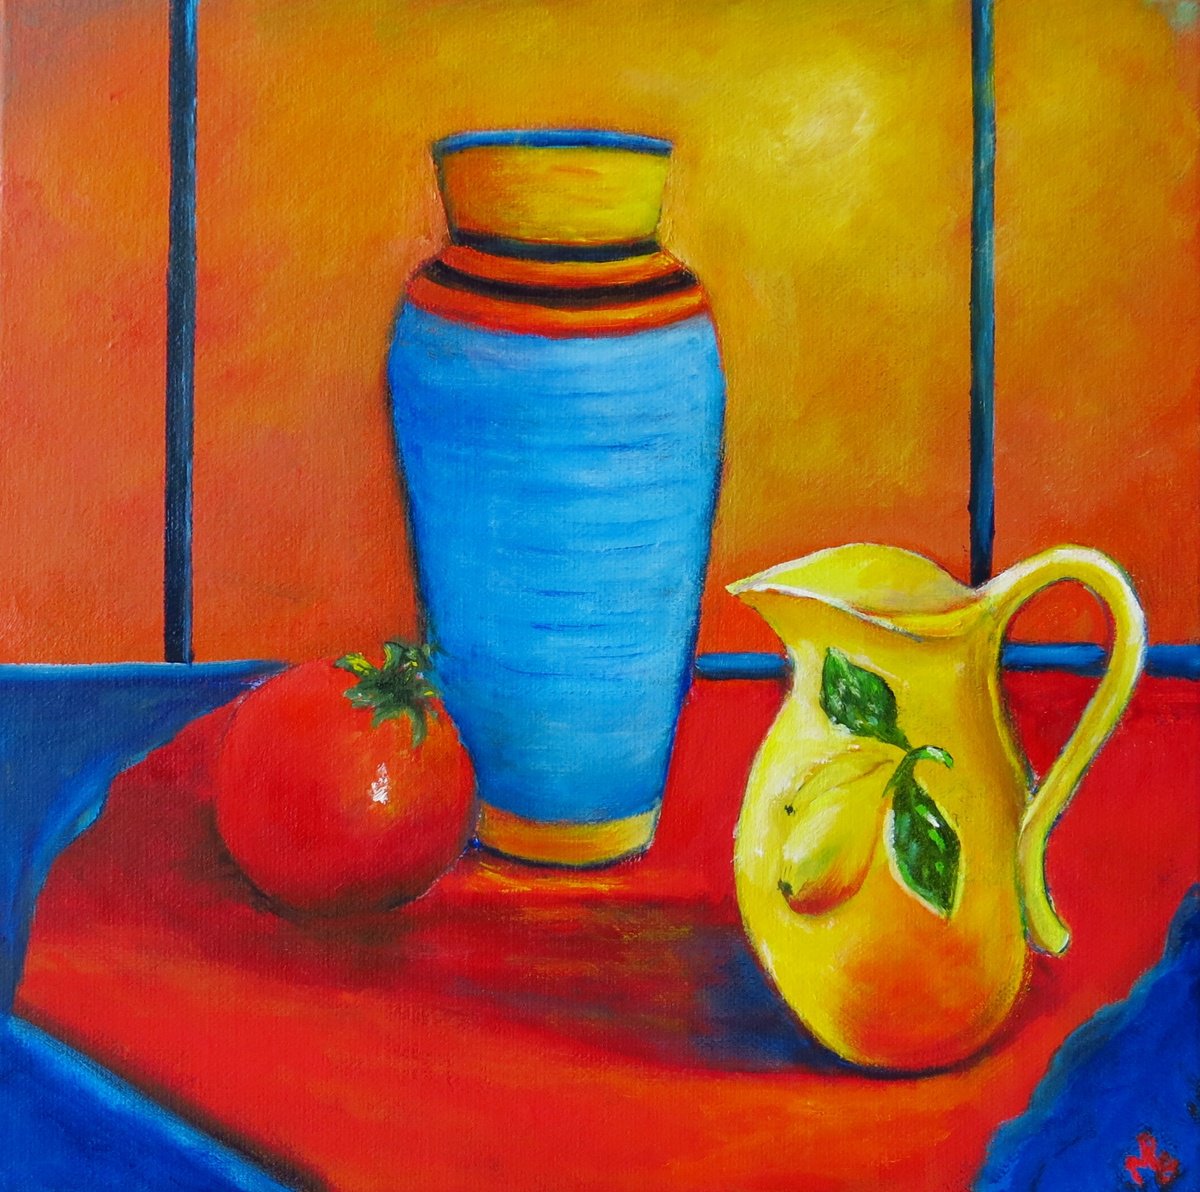 The Turquoise Vase by Maureen Greenwood